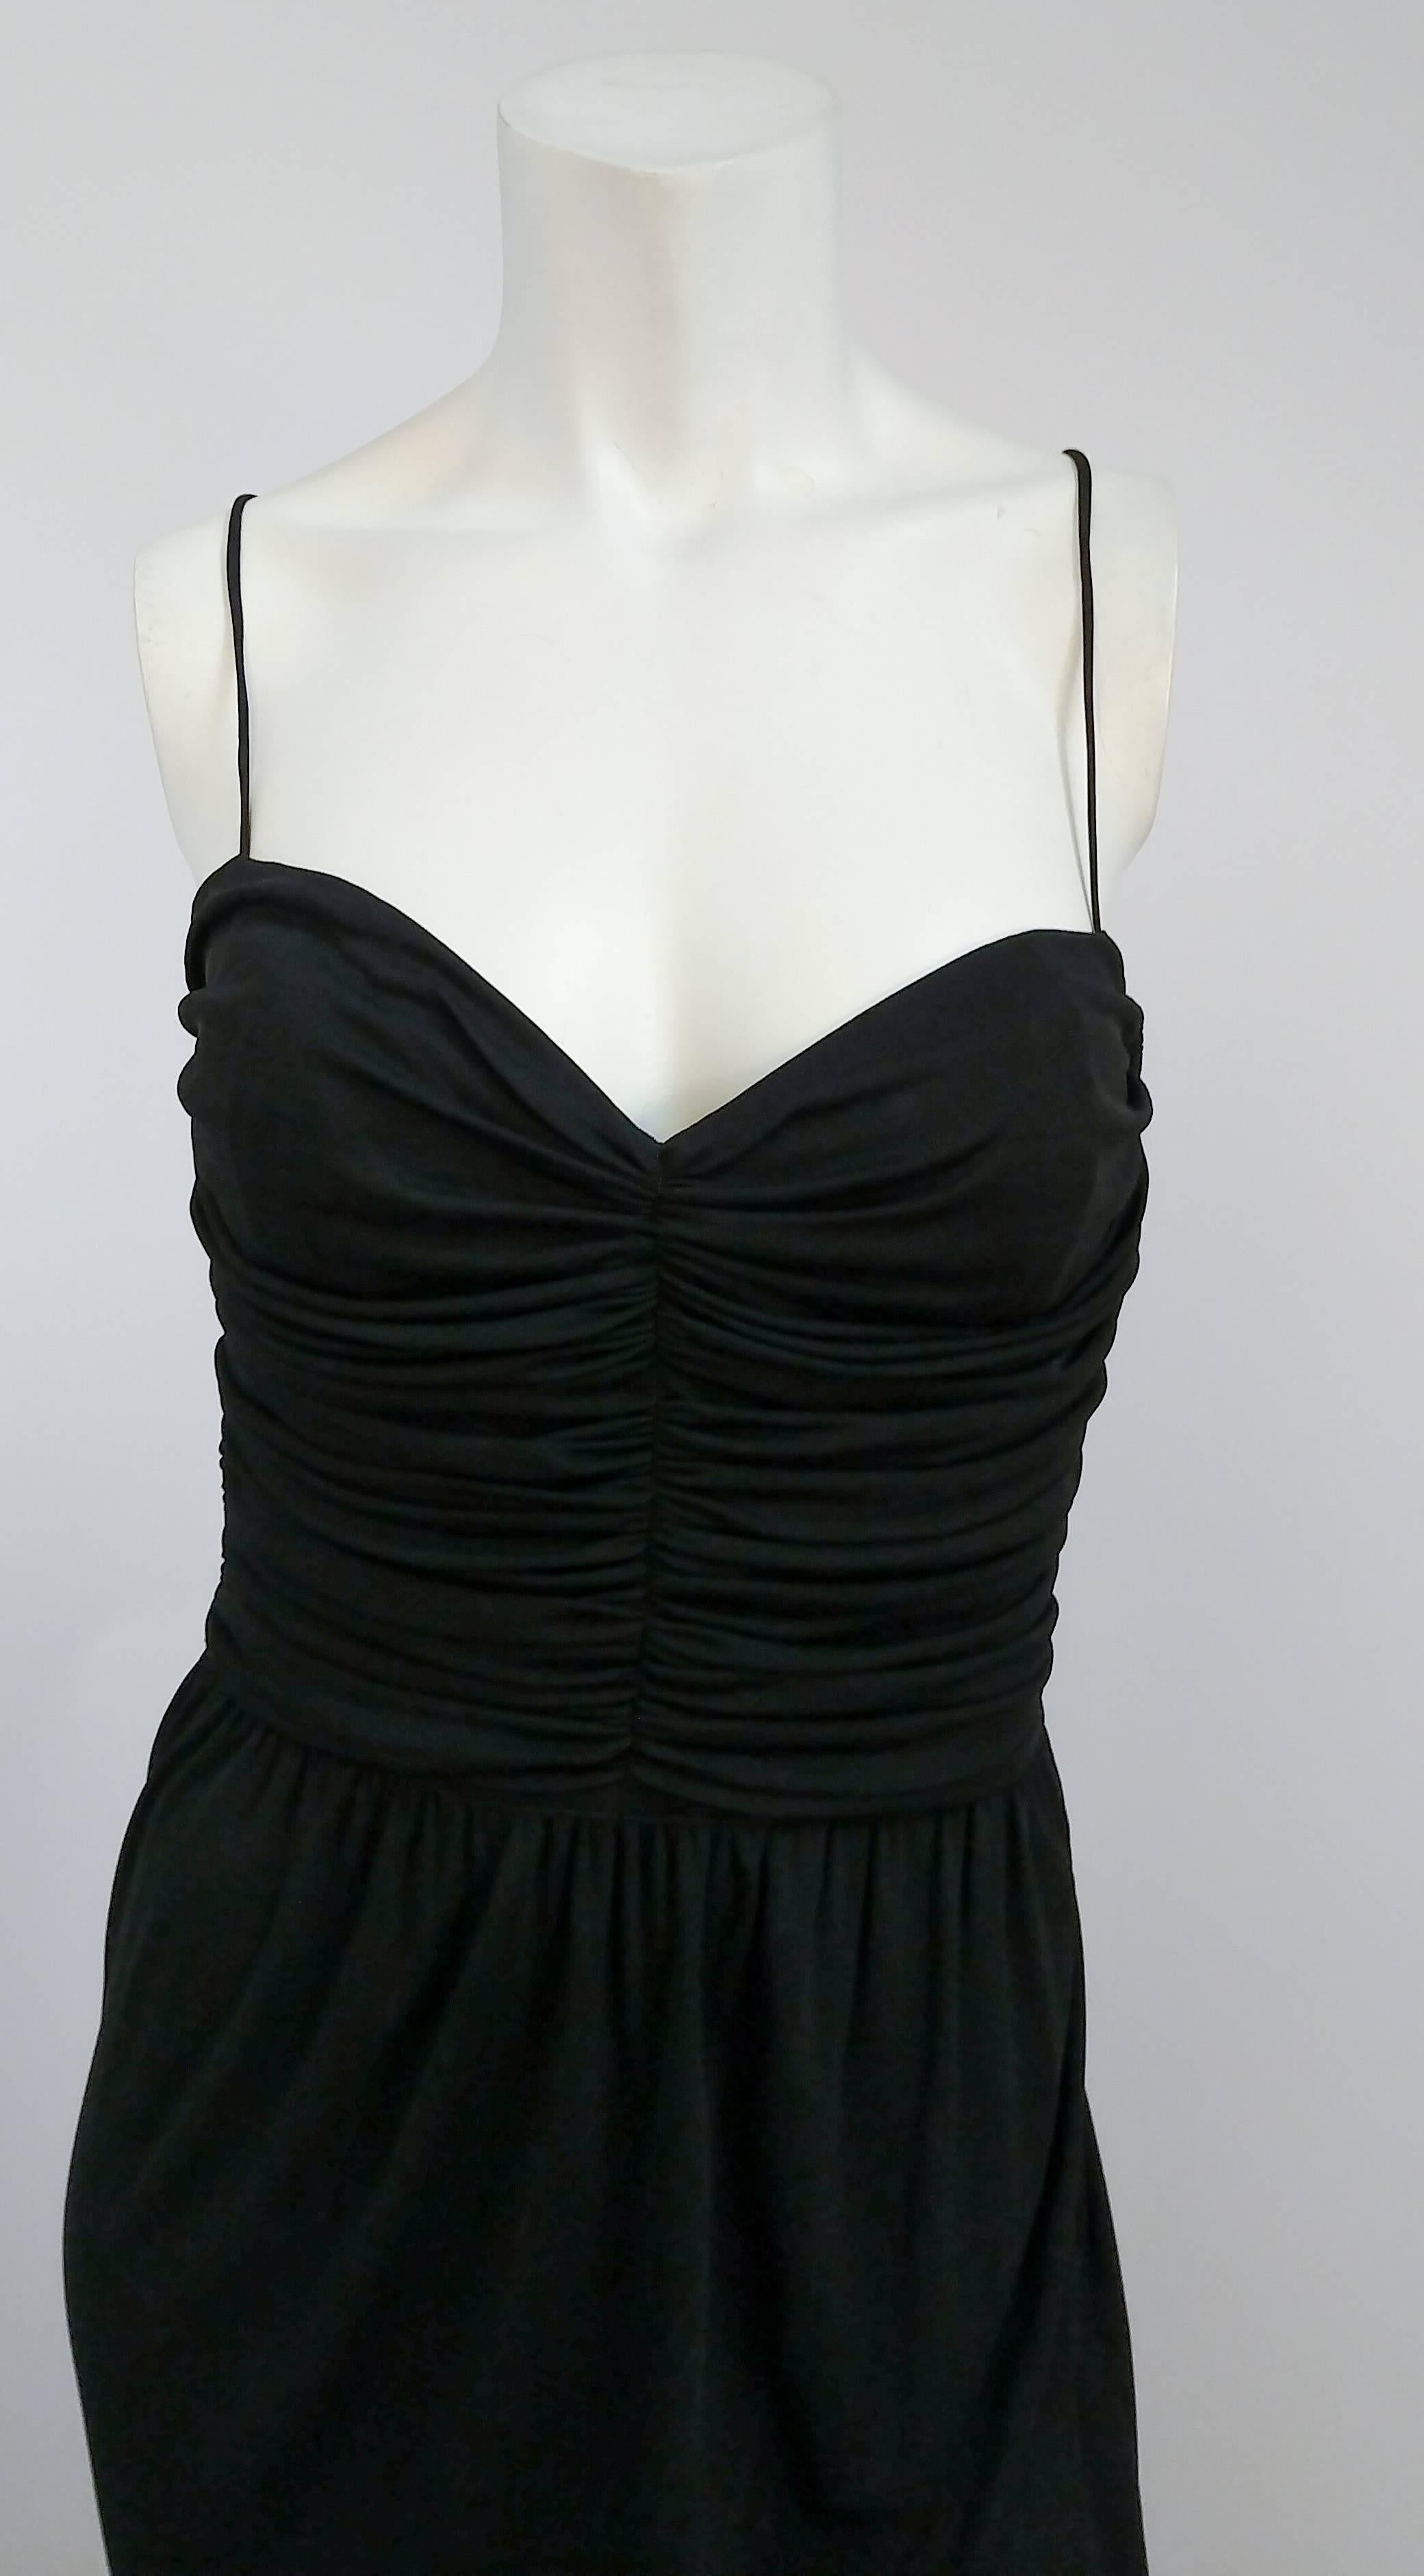 1970s Black Jersey Maxi Dress. Ruched front bodice. Sexy & strappy, with one slit up side for legs. 